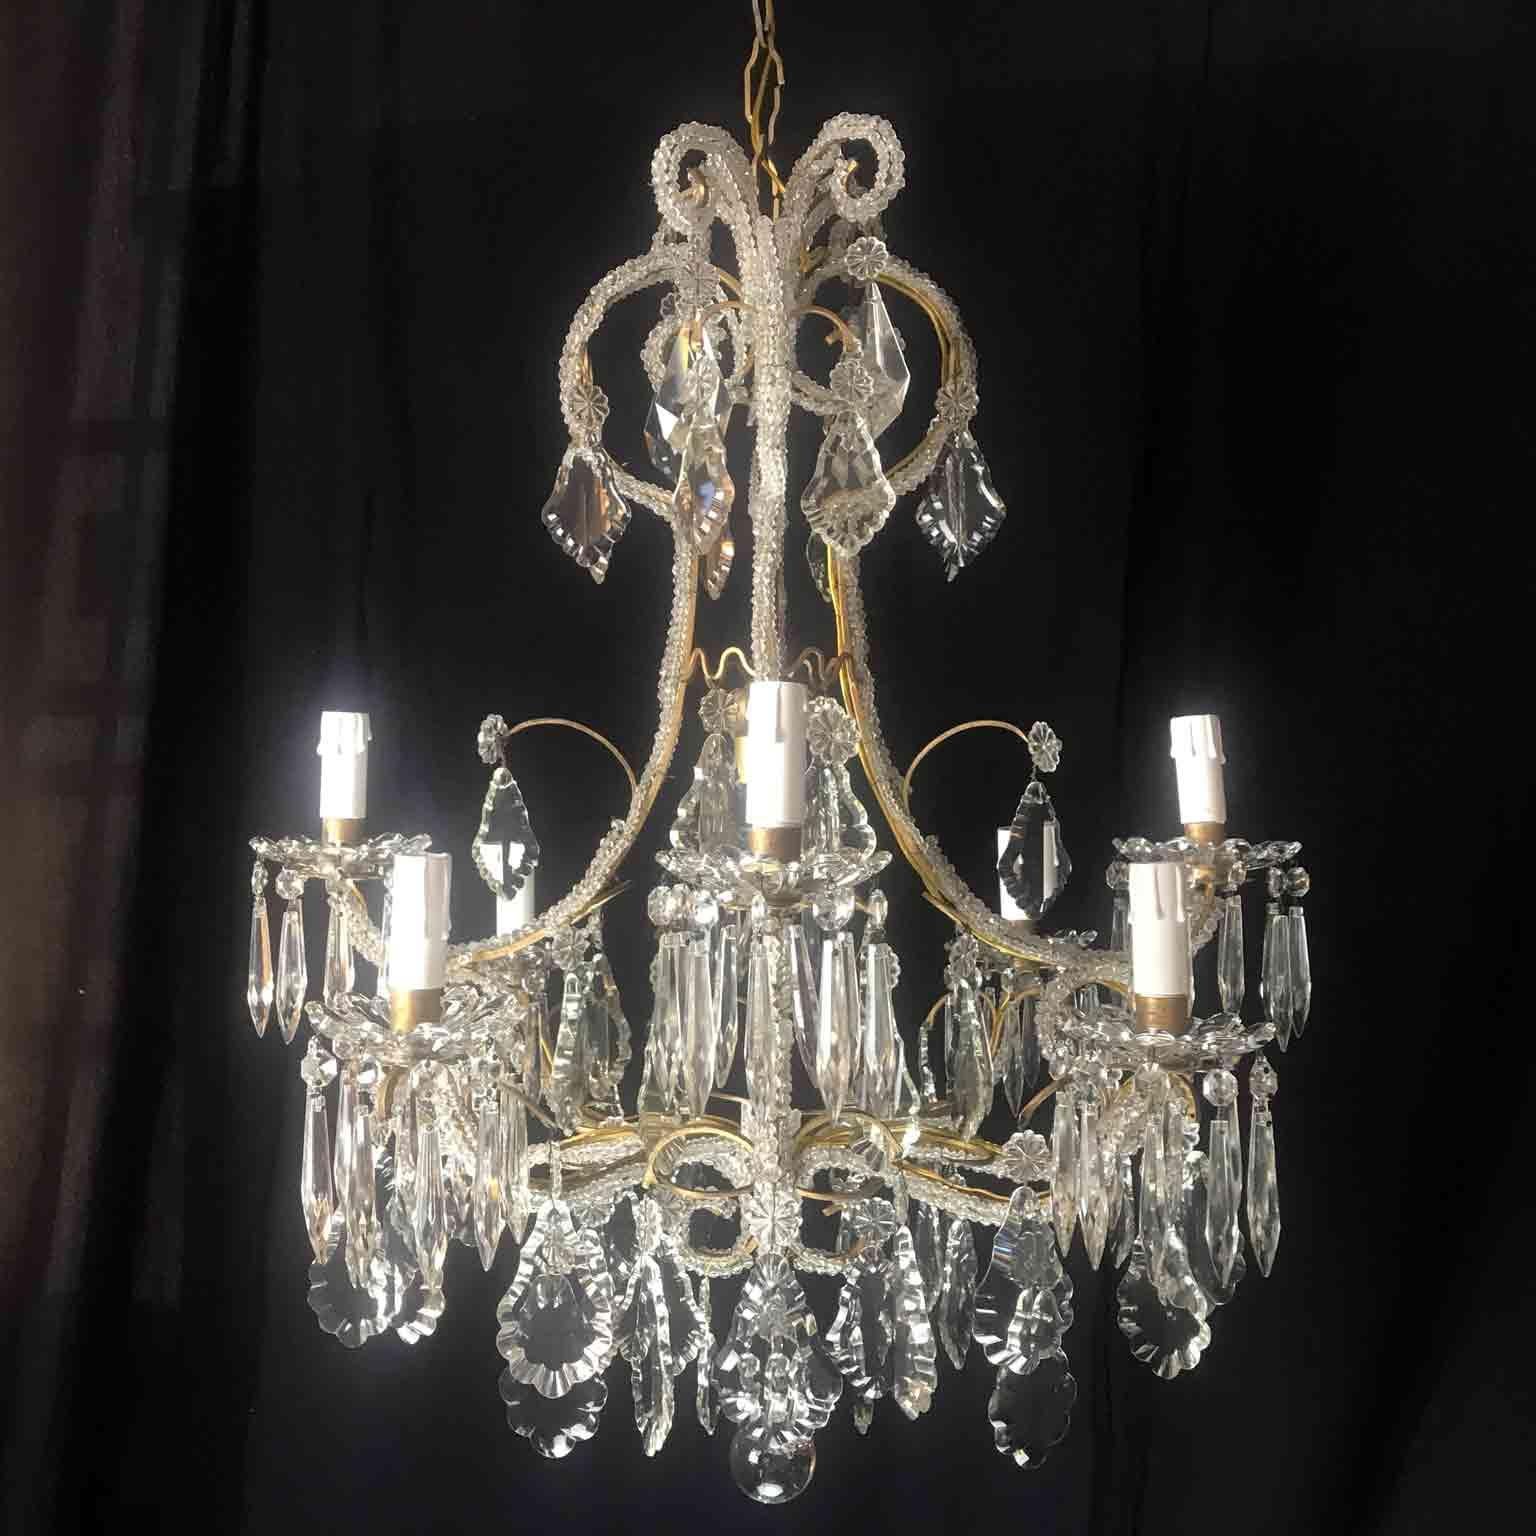 20th century Italian beaded crystal nine-light cage chandelier, a lovely and romantic cage chandelier realized with squared section iron structure, with gilt finish, in good condition, ready to hang.
Two-tier curved beaded crystal arms ending with